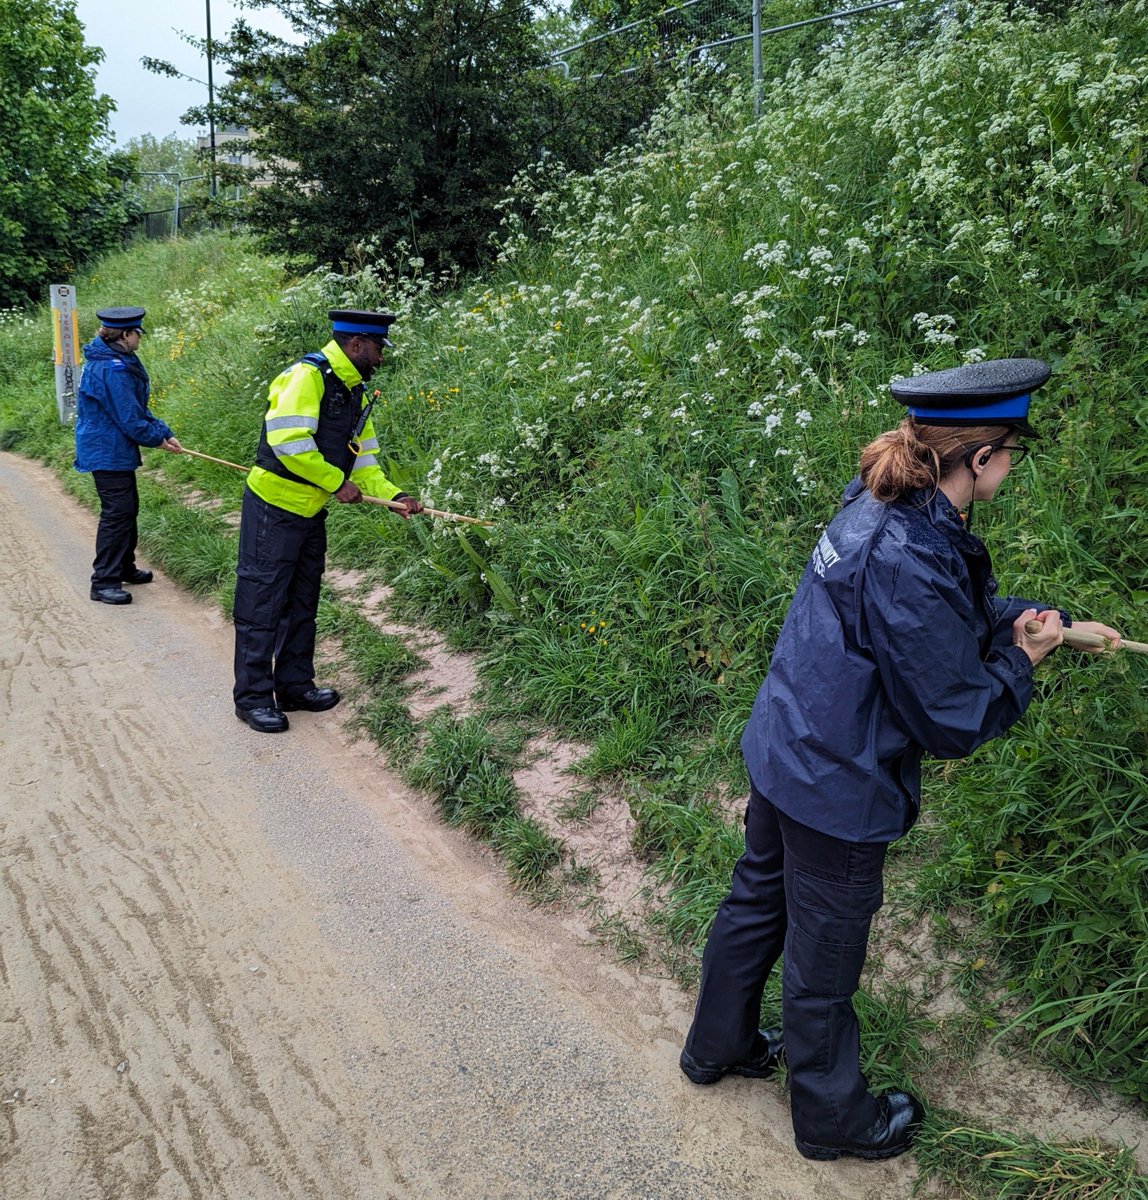 Bath NPT PCSO's conducted knife sweeps in the cities green spaces today as part of #OPSCEPTRE. Op Sceptre, a national campaign, is an opportunity to highlight the work that goes on throughout the year to reduce the number of knives on the streets and help keep communities safer.